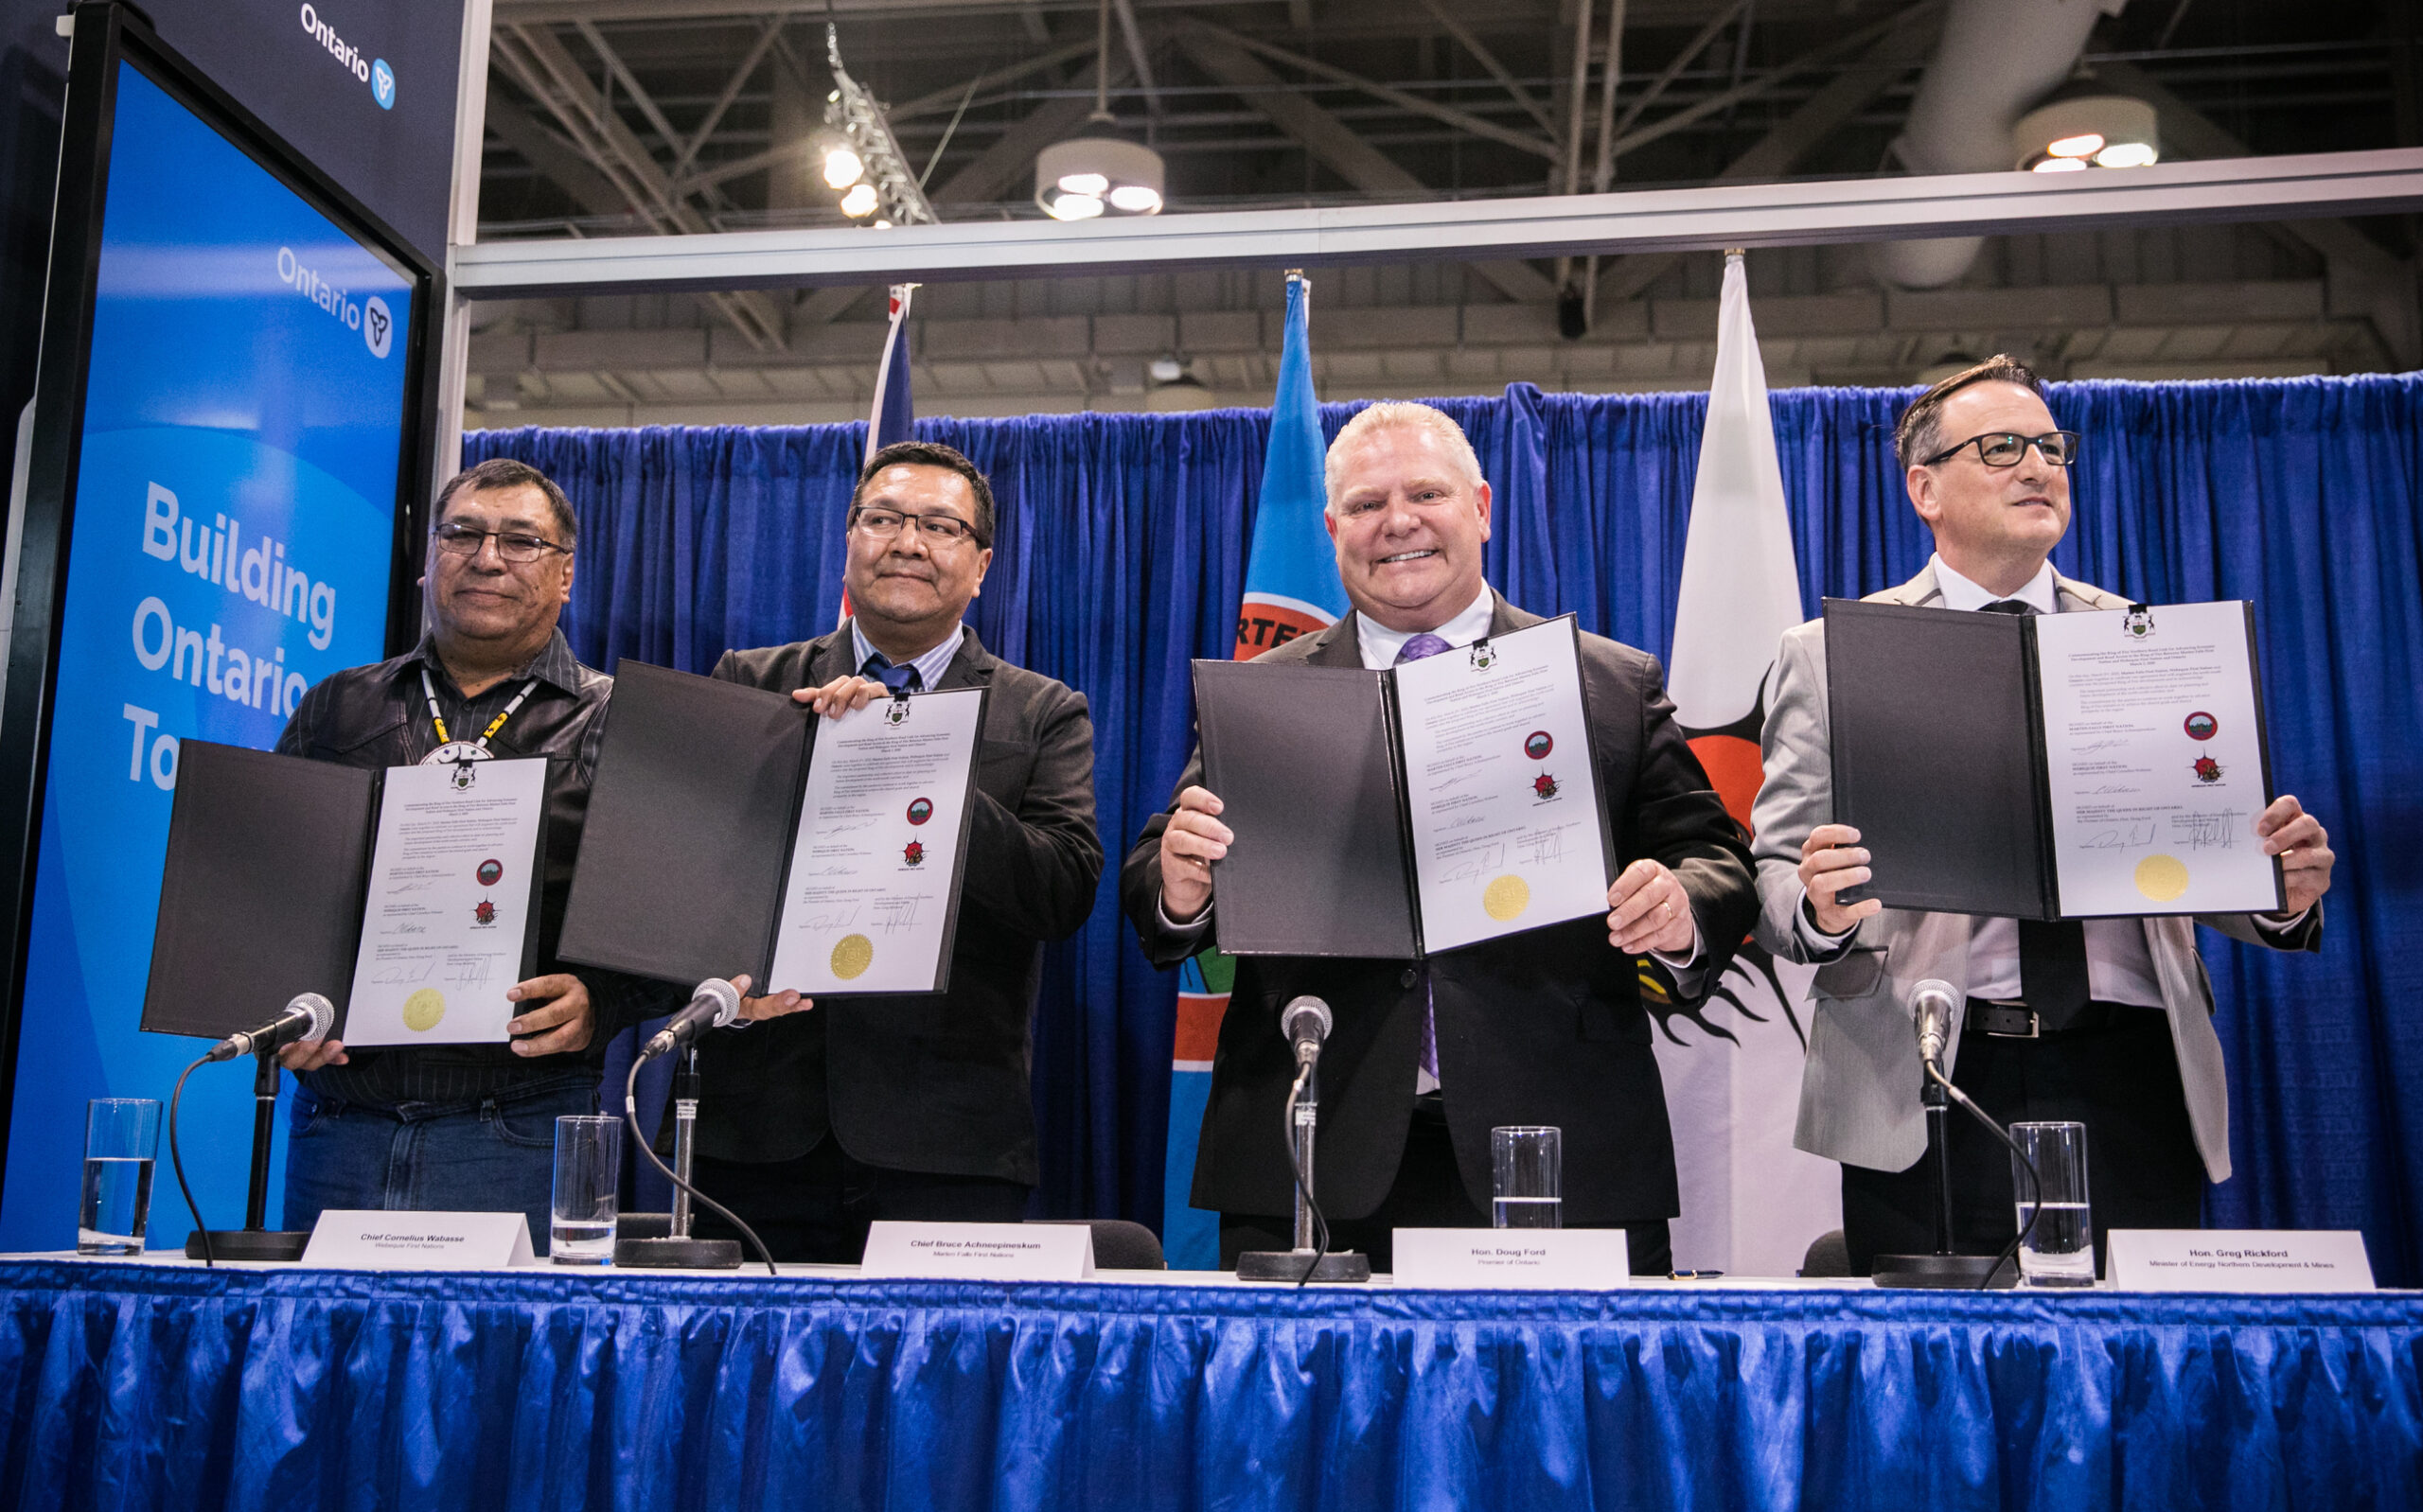 Cornelius Wabasse, Bruce Achneepinkesum, Doug Ford and Greg Rickford hold up signed papers to the camera in front of a blue backdrop.